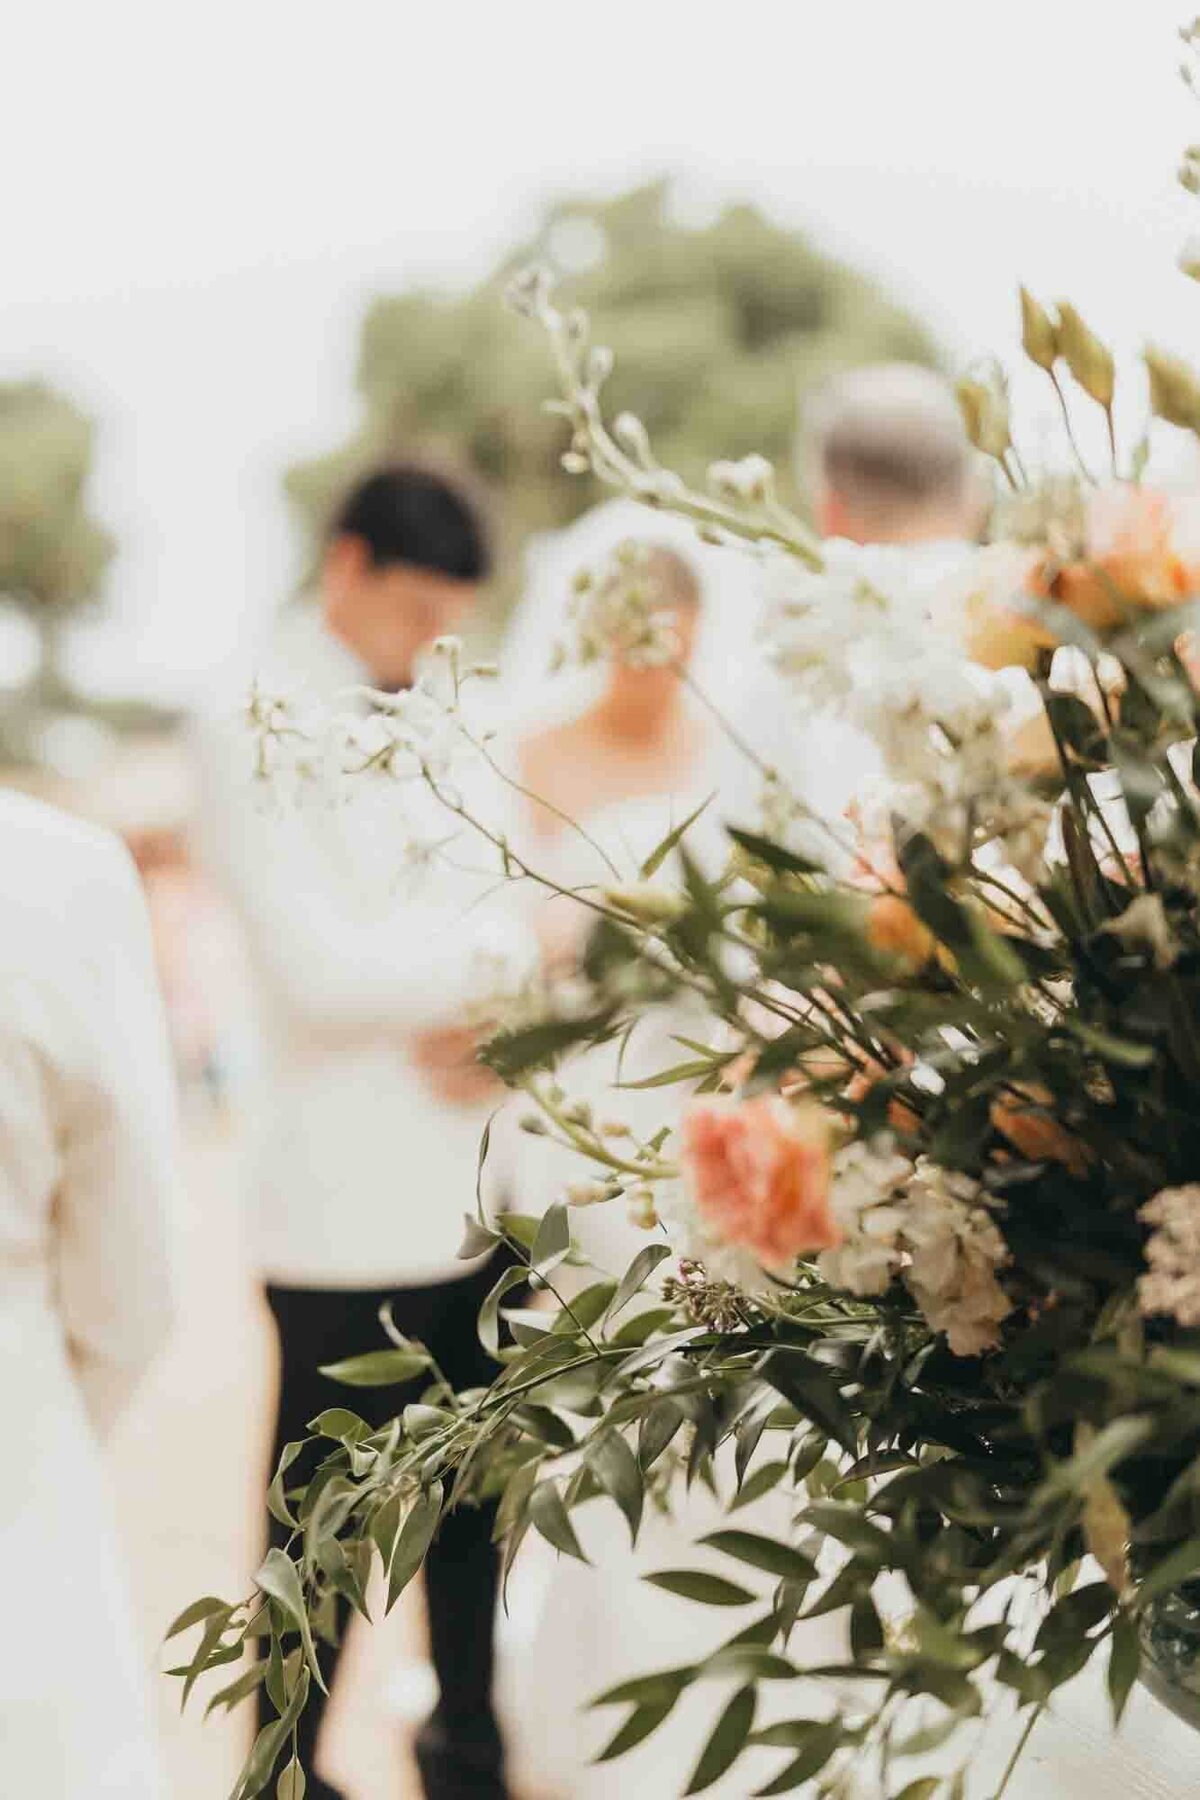 florals in focus with bride and groom in background of image.